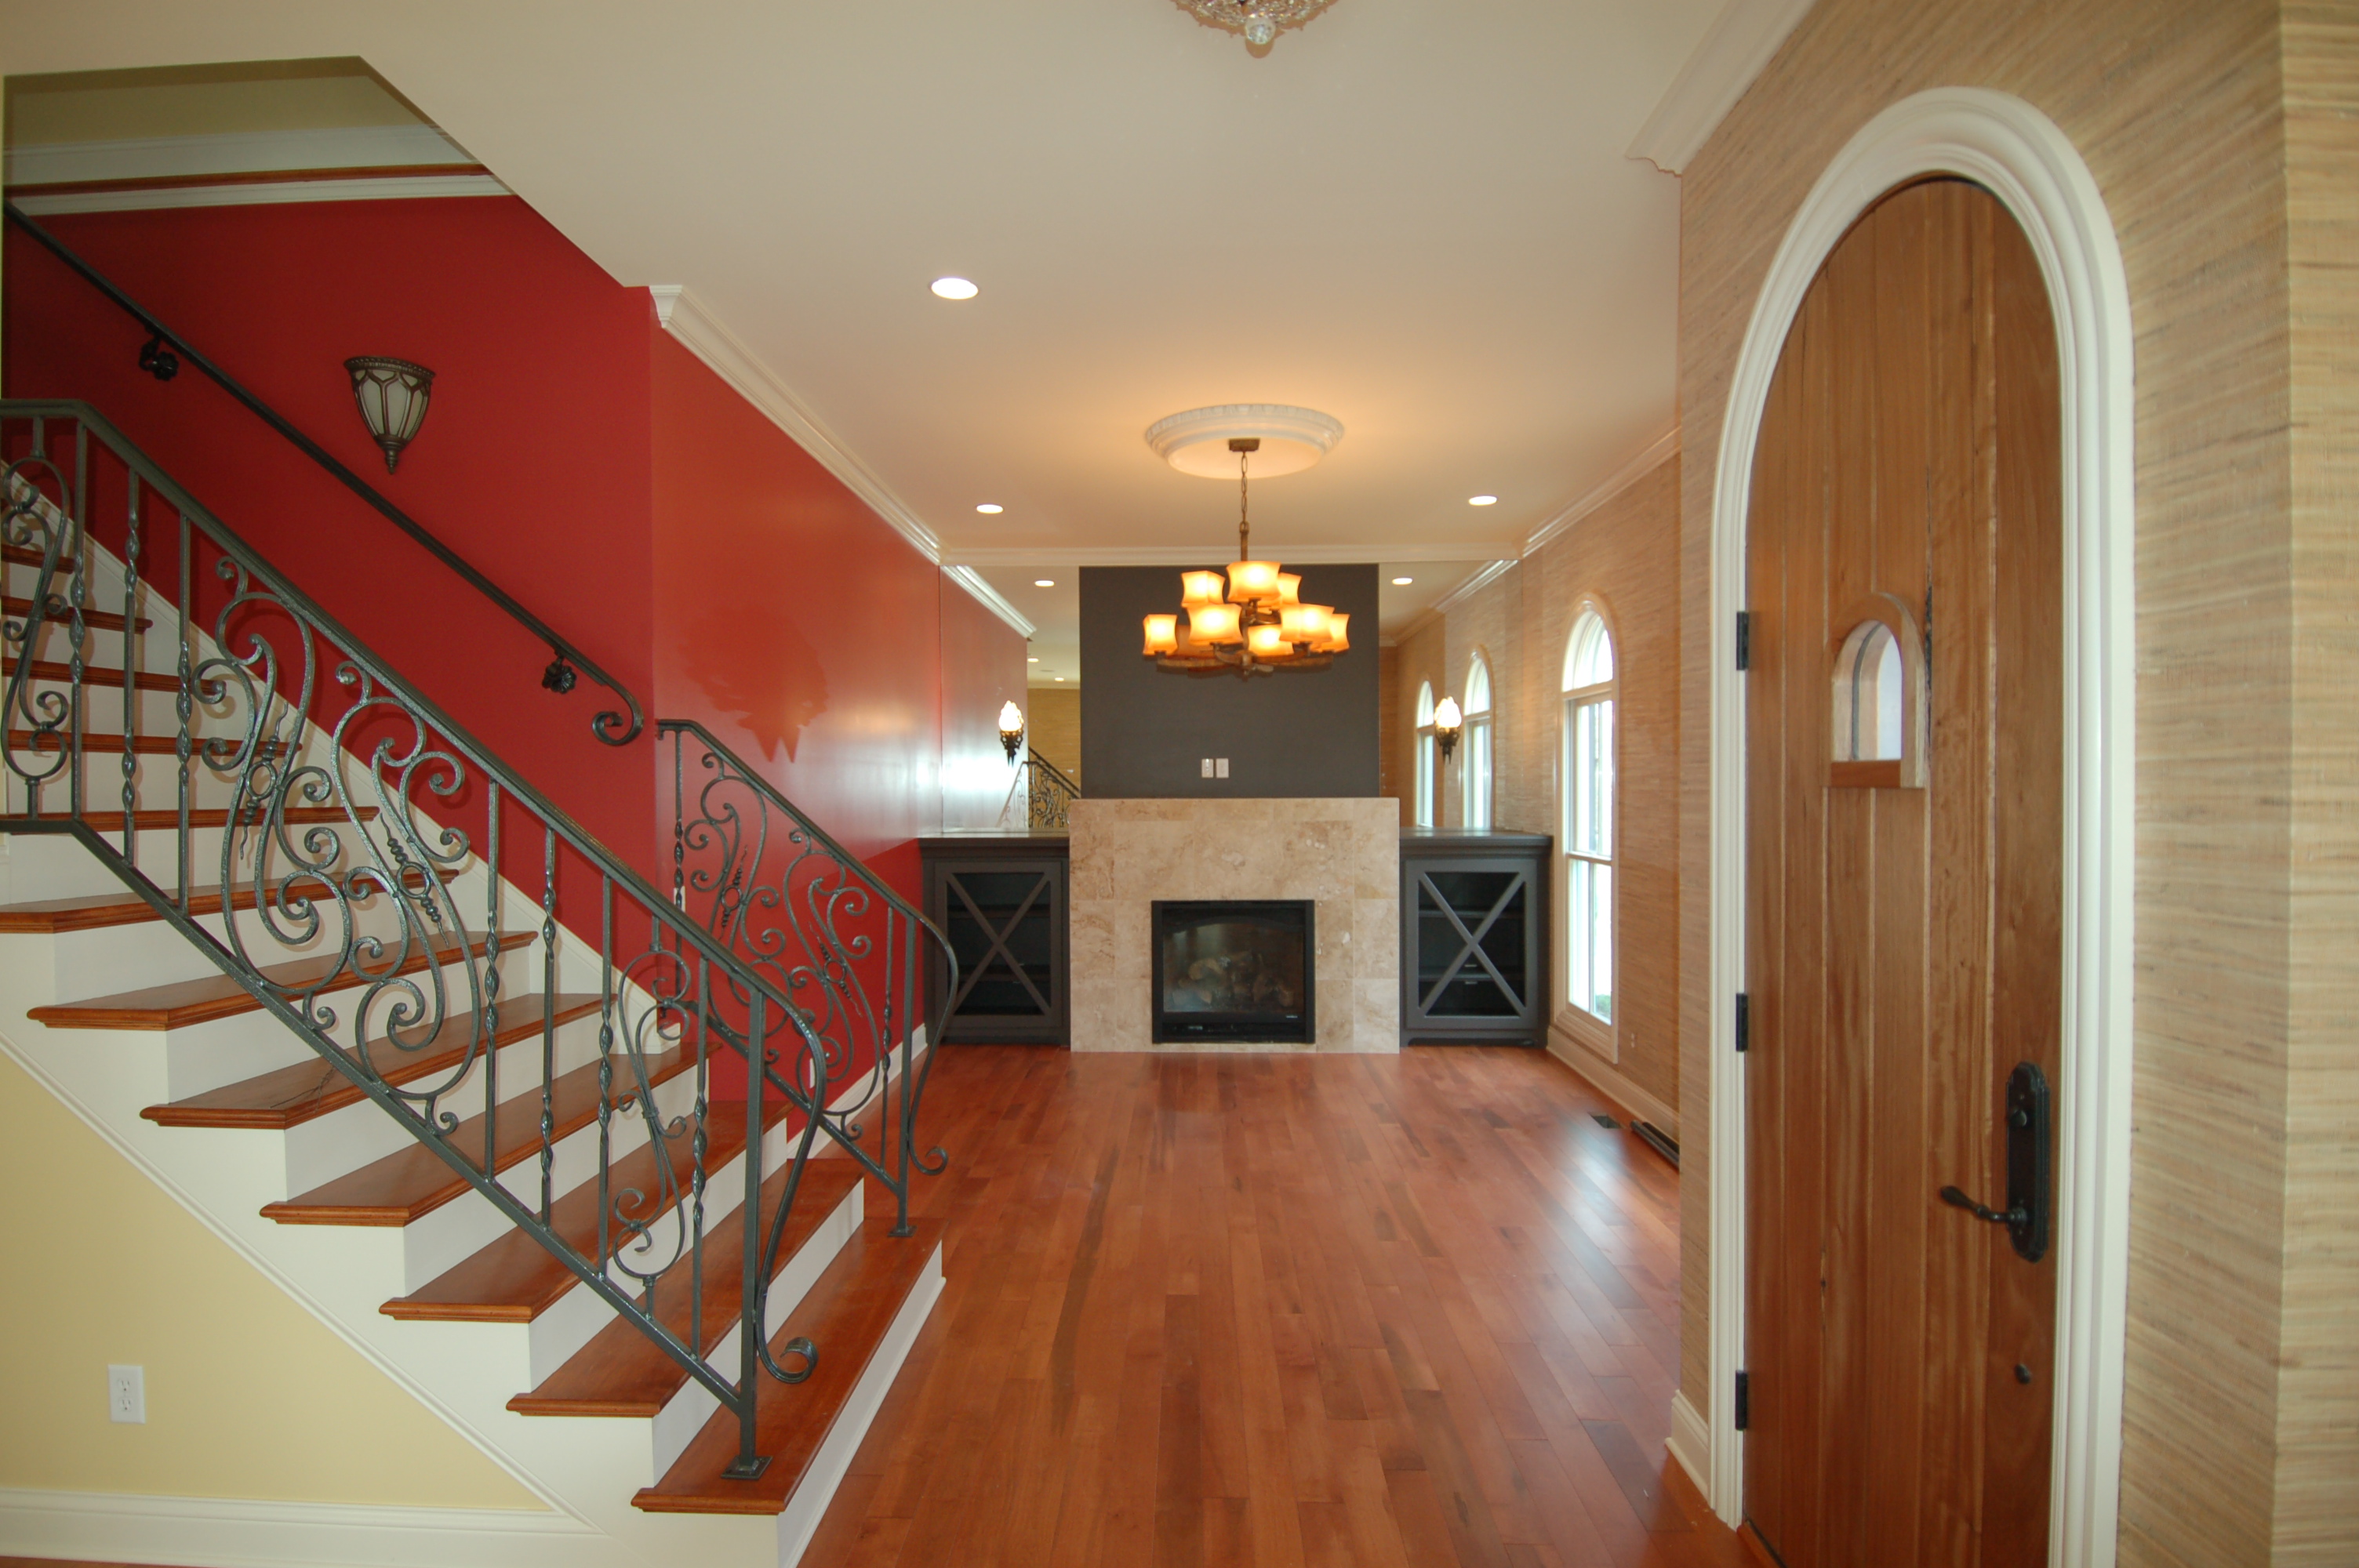 Cary Painters 919 422 0595 Best Professional Interior